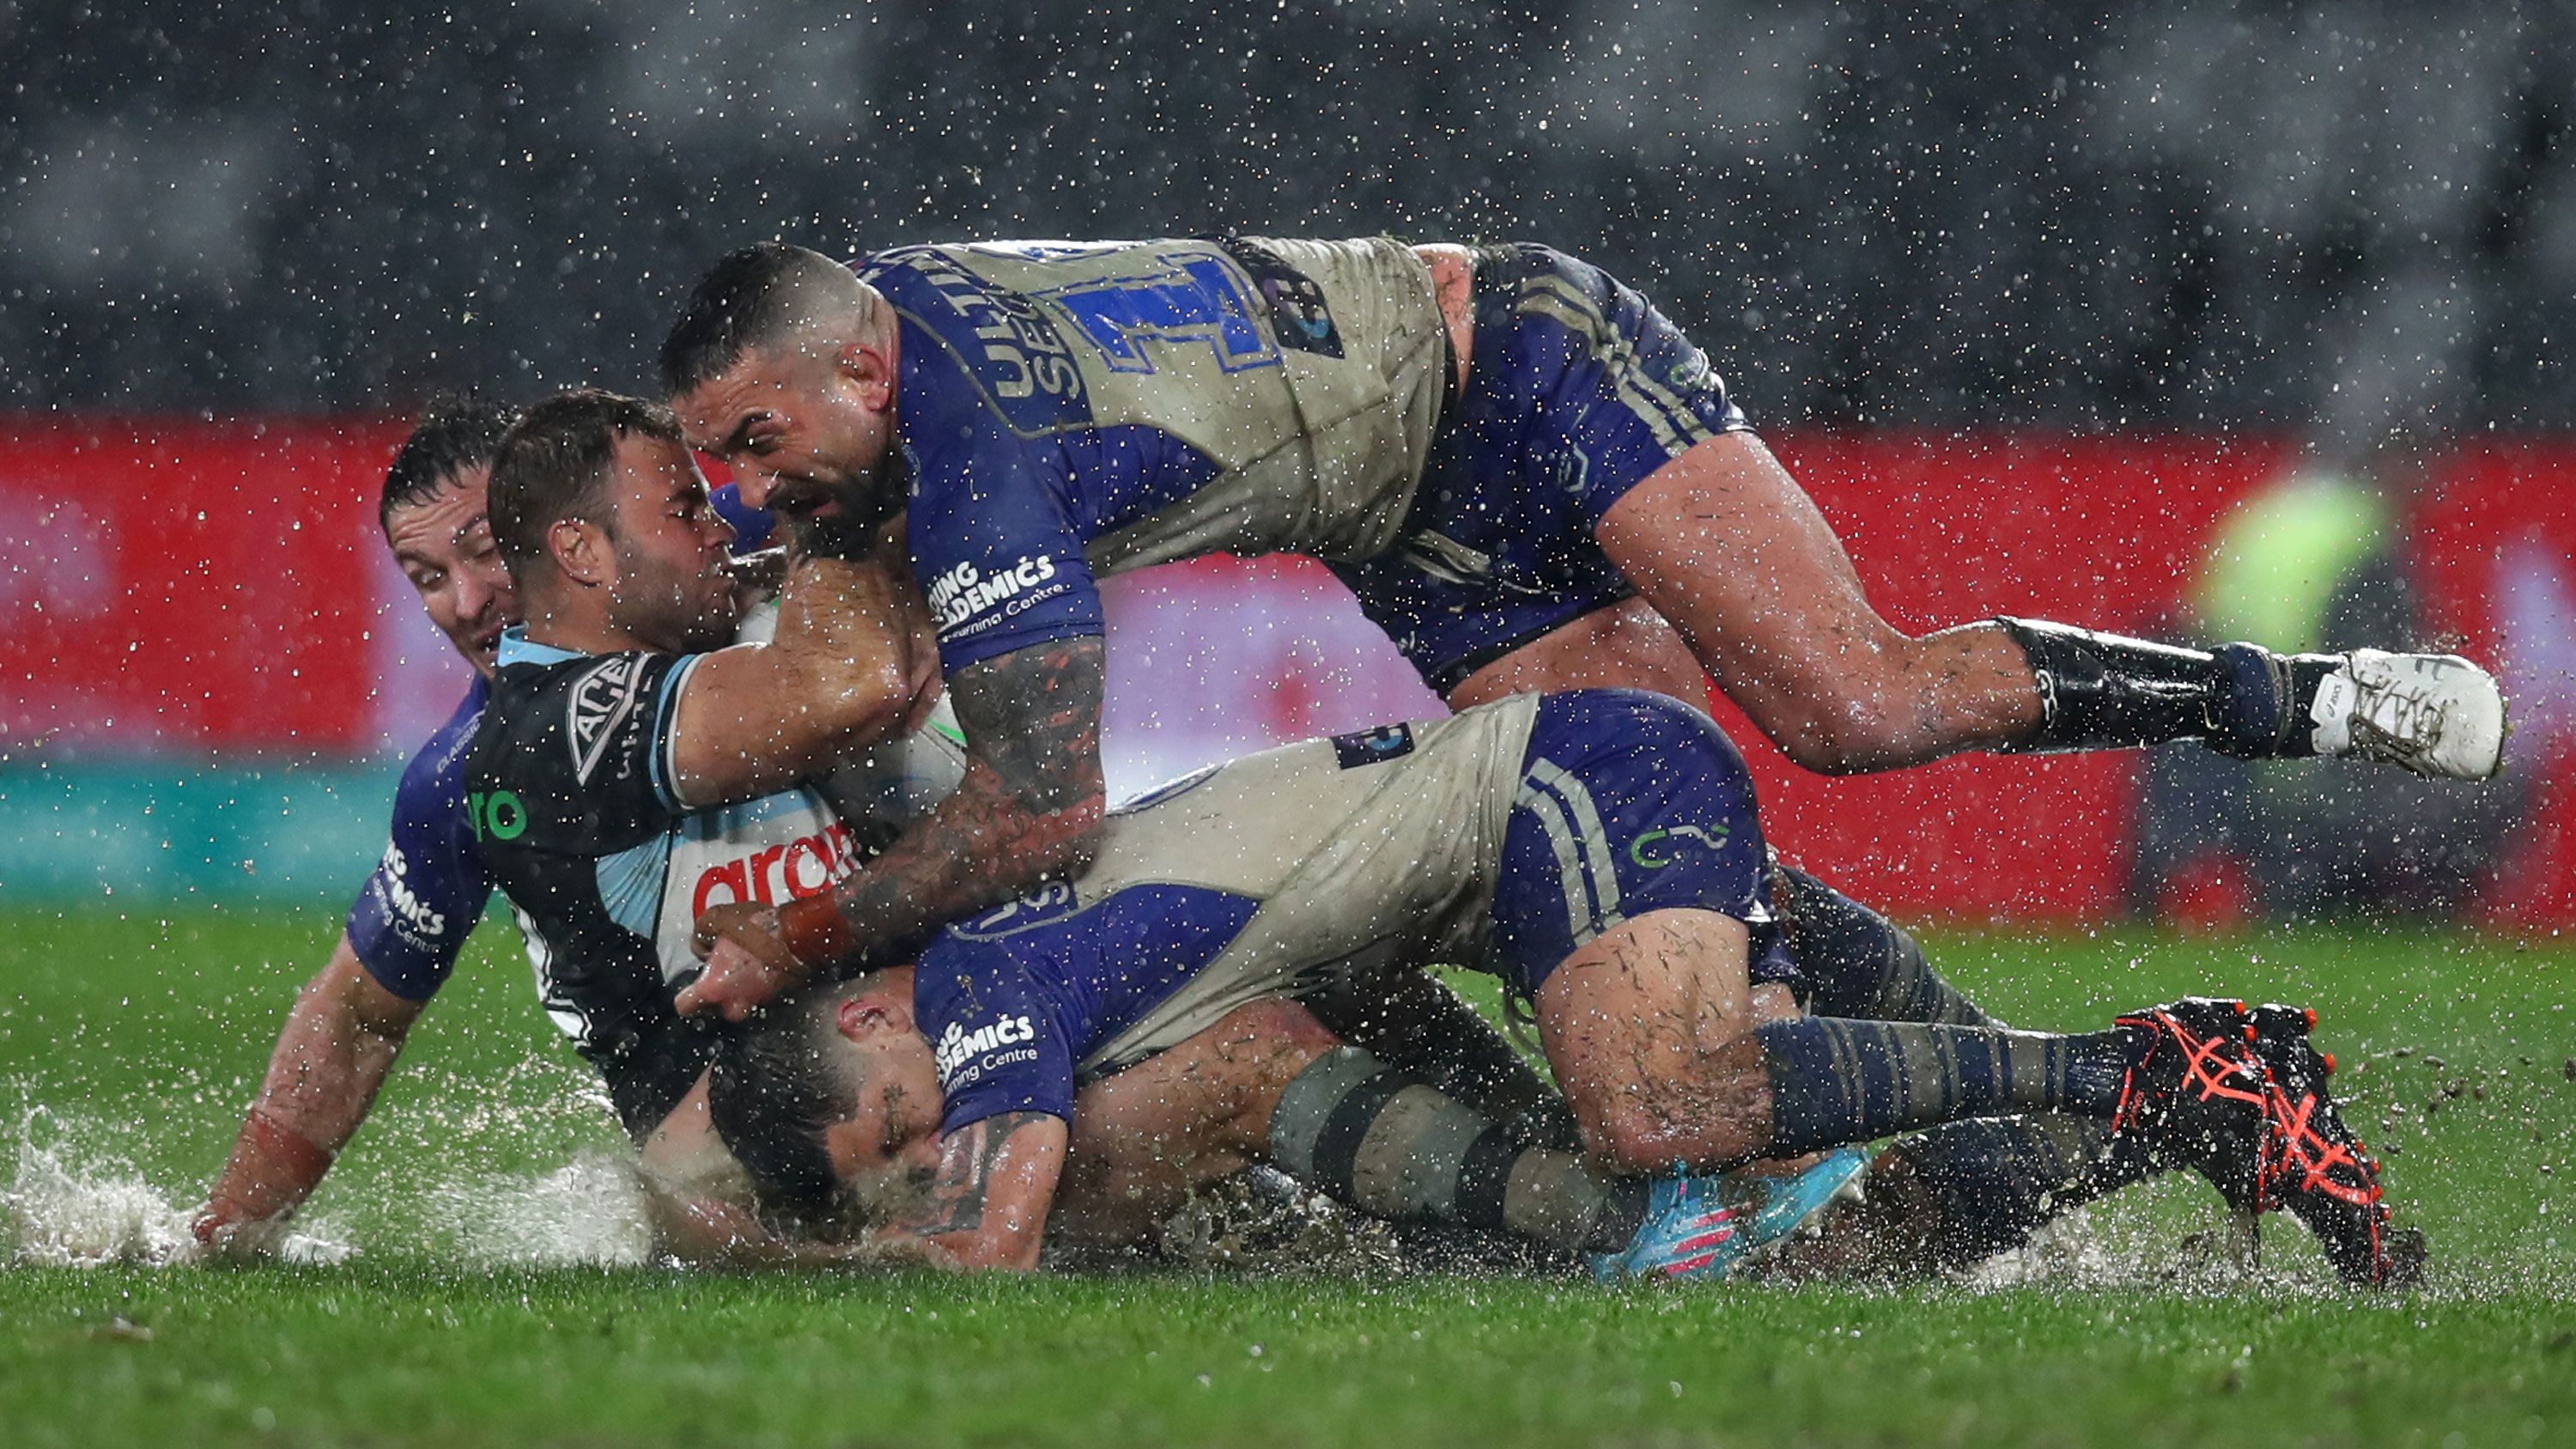 Rain falls hard on the soggy surface as Wade Graham of the Sharks is tackled by Paul Vaughan of the Bulldogs during their round 16 NRL match.